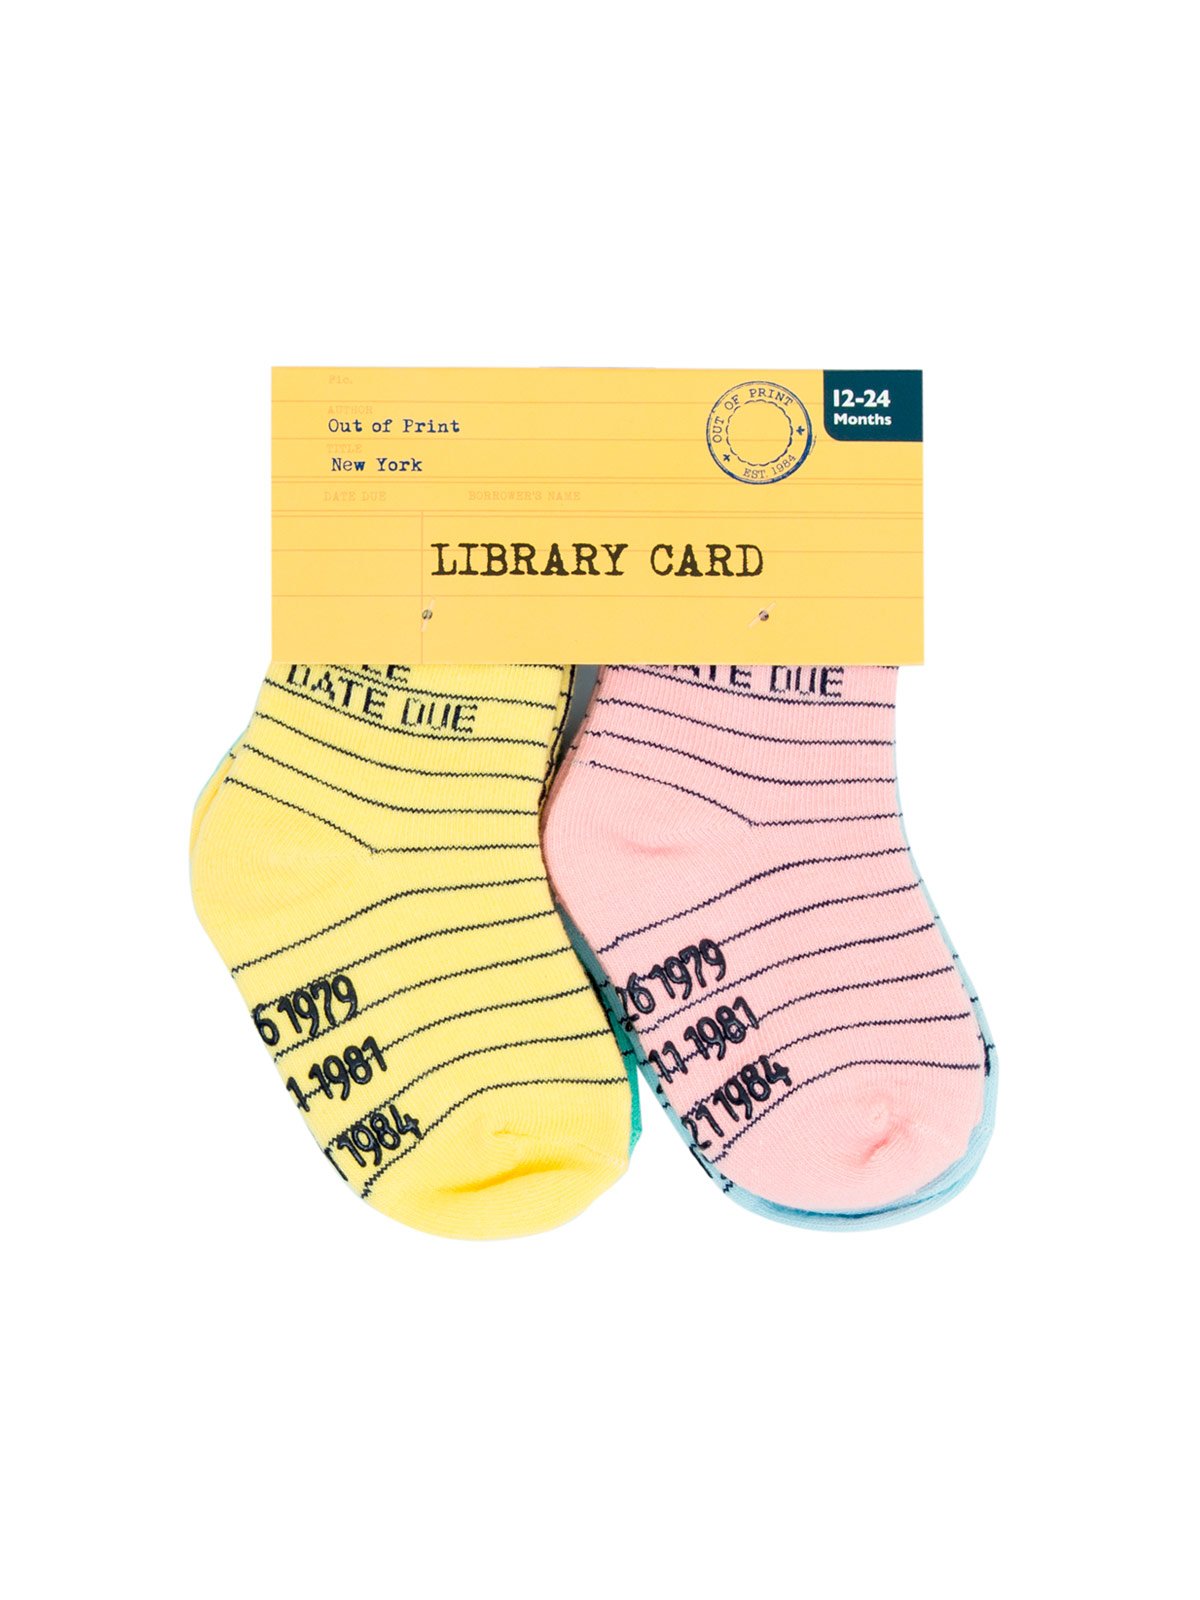 Shown in the packaging, this 4 pack of kid's cotton crew socks in yellow, pink, blue and green by the brand Out of Print feature the iconic library card design with the words 